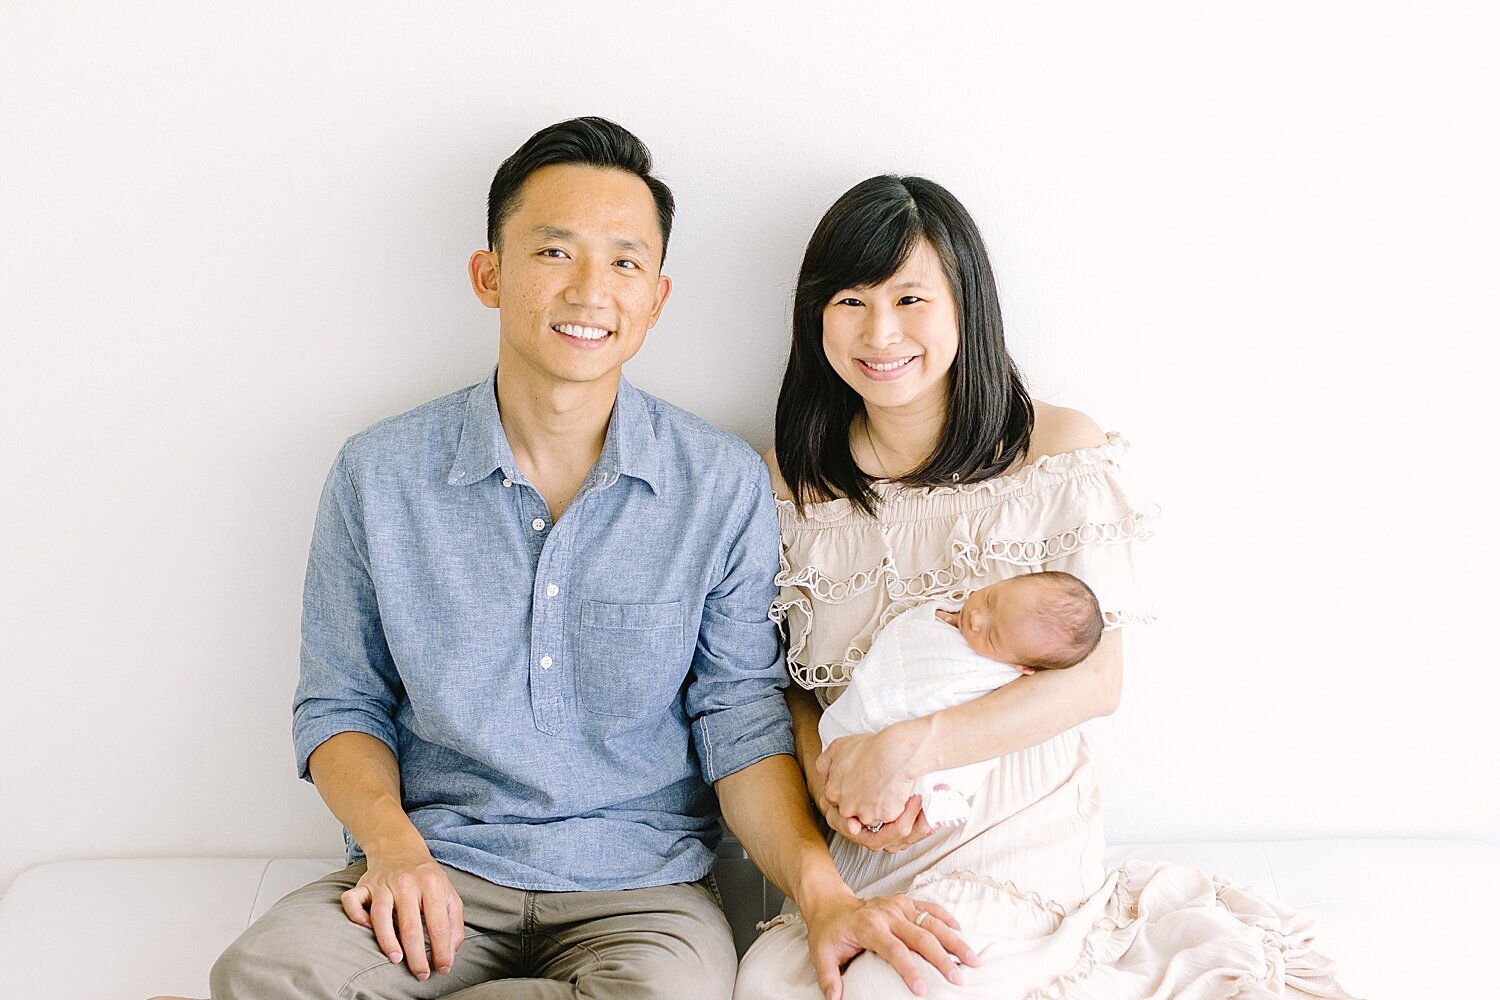 Mom and Dad with their newborn son in Newport Beach Photography Studio. Photos by Ambre Williams Photography.